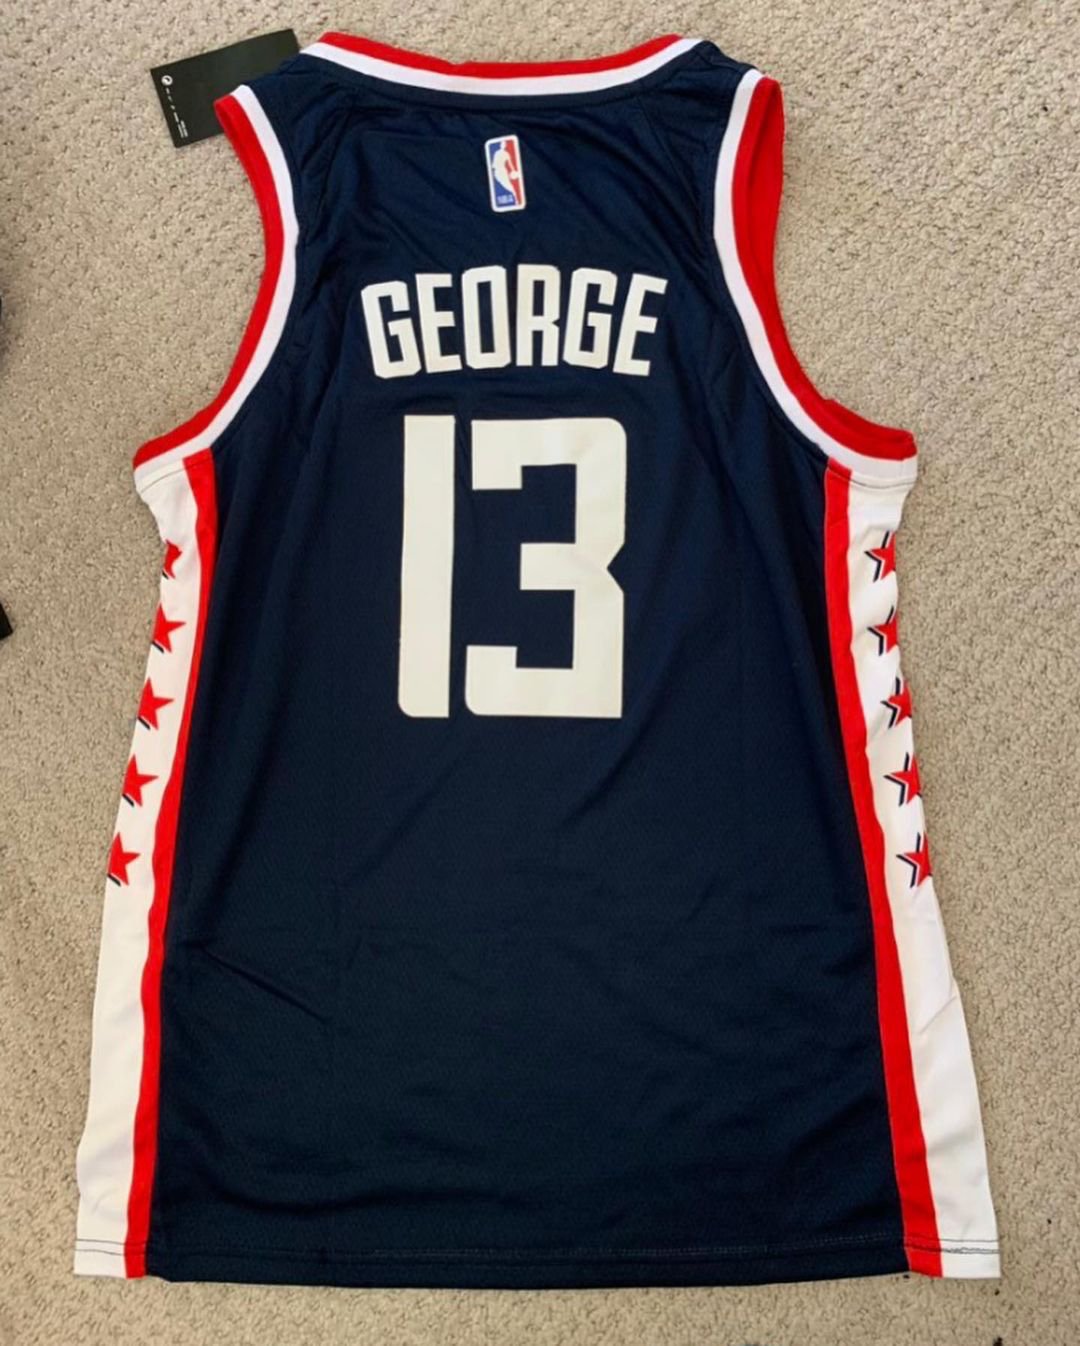 Los Angeles Clippers - Paul George jersey - JerseyAve - Marketplace